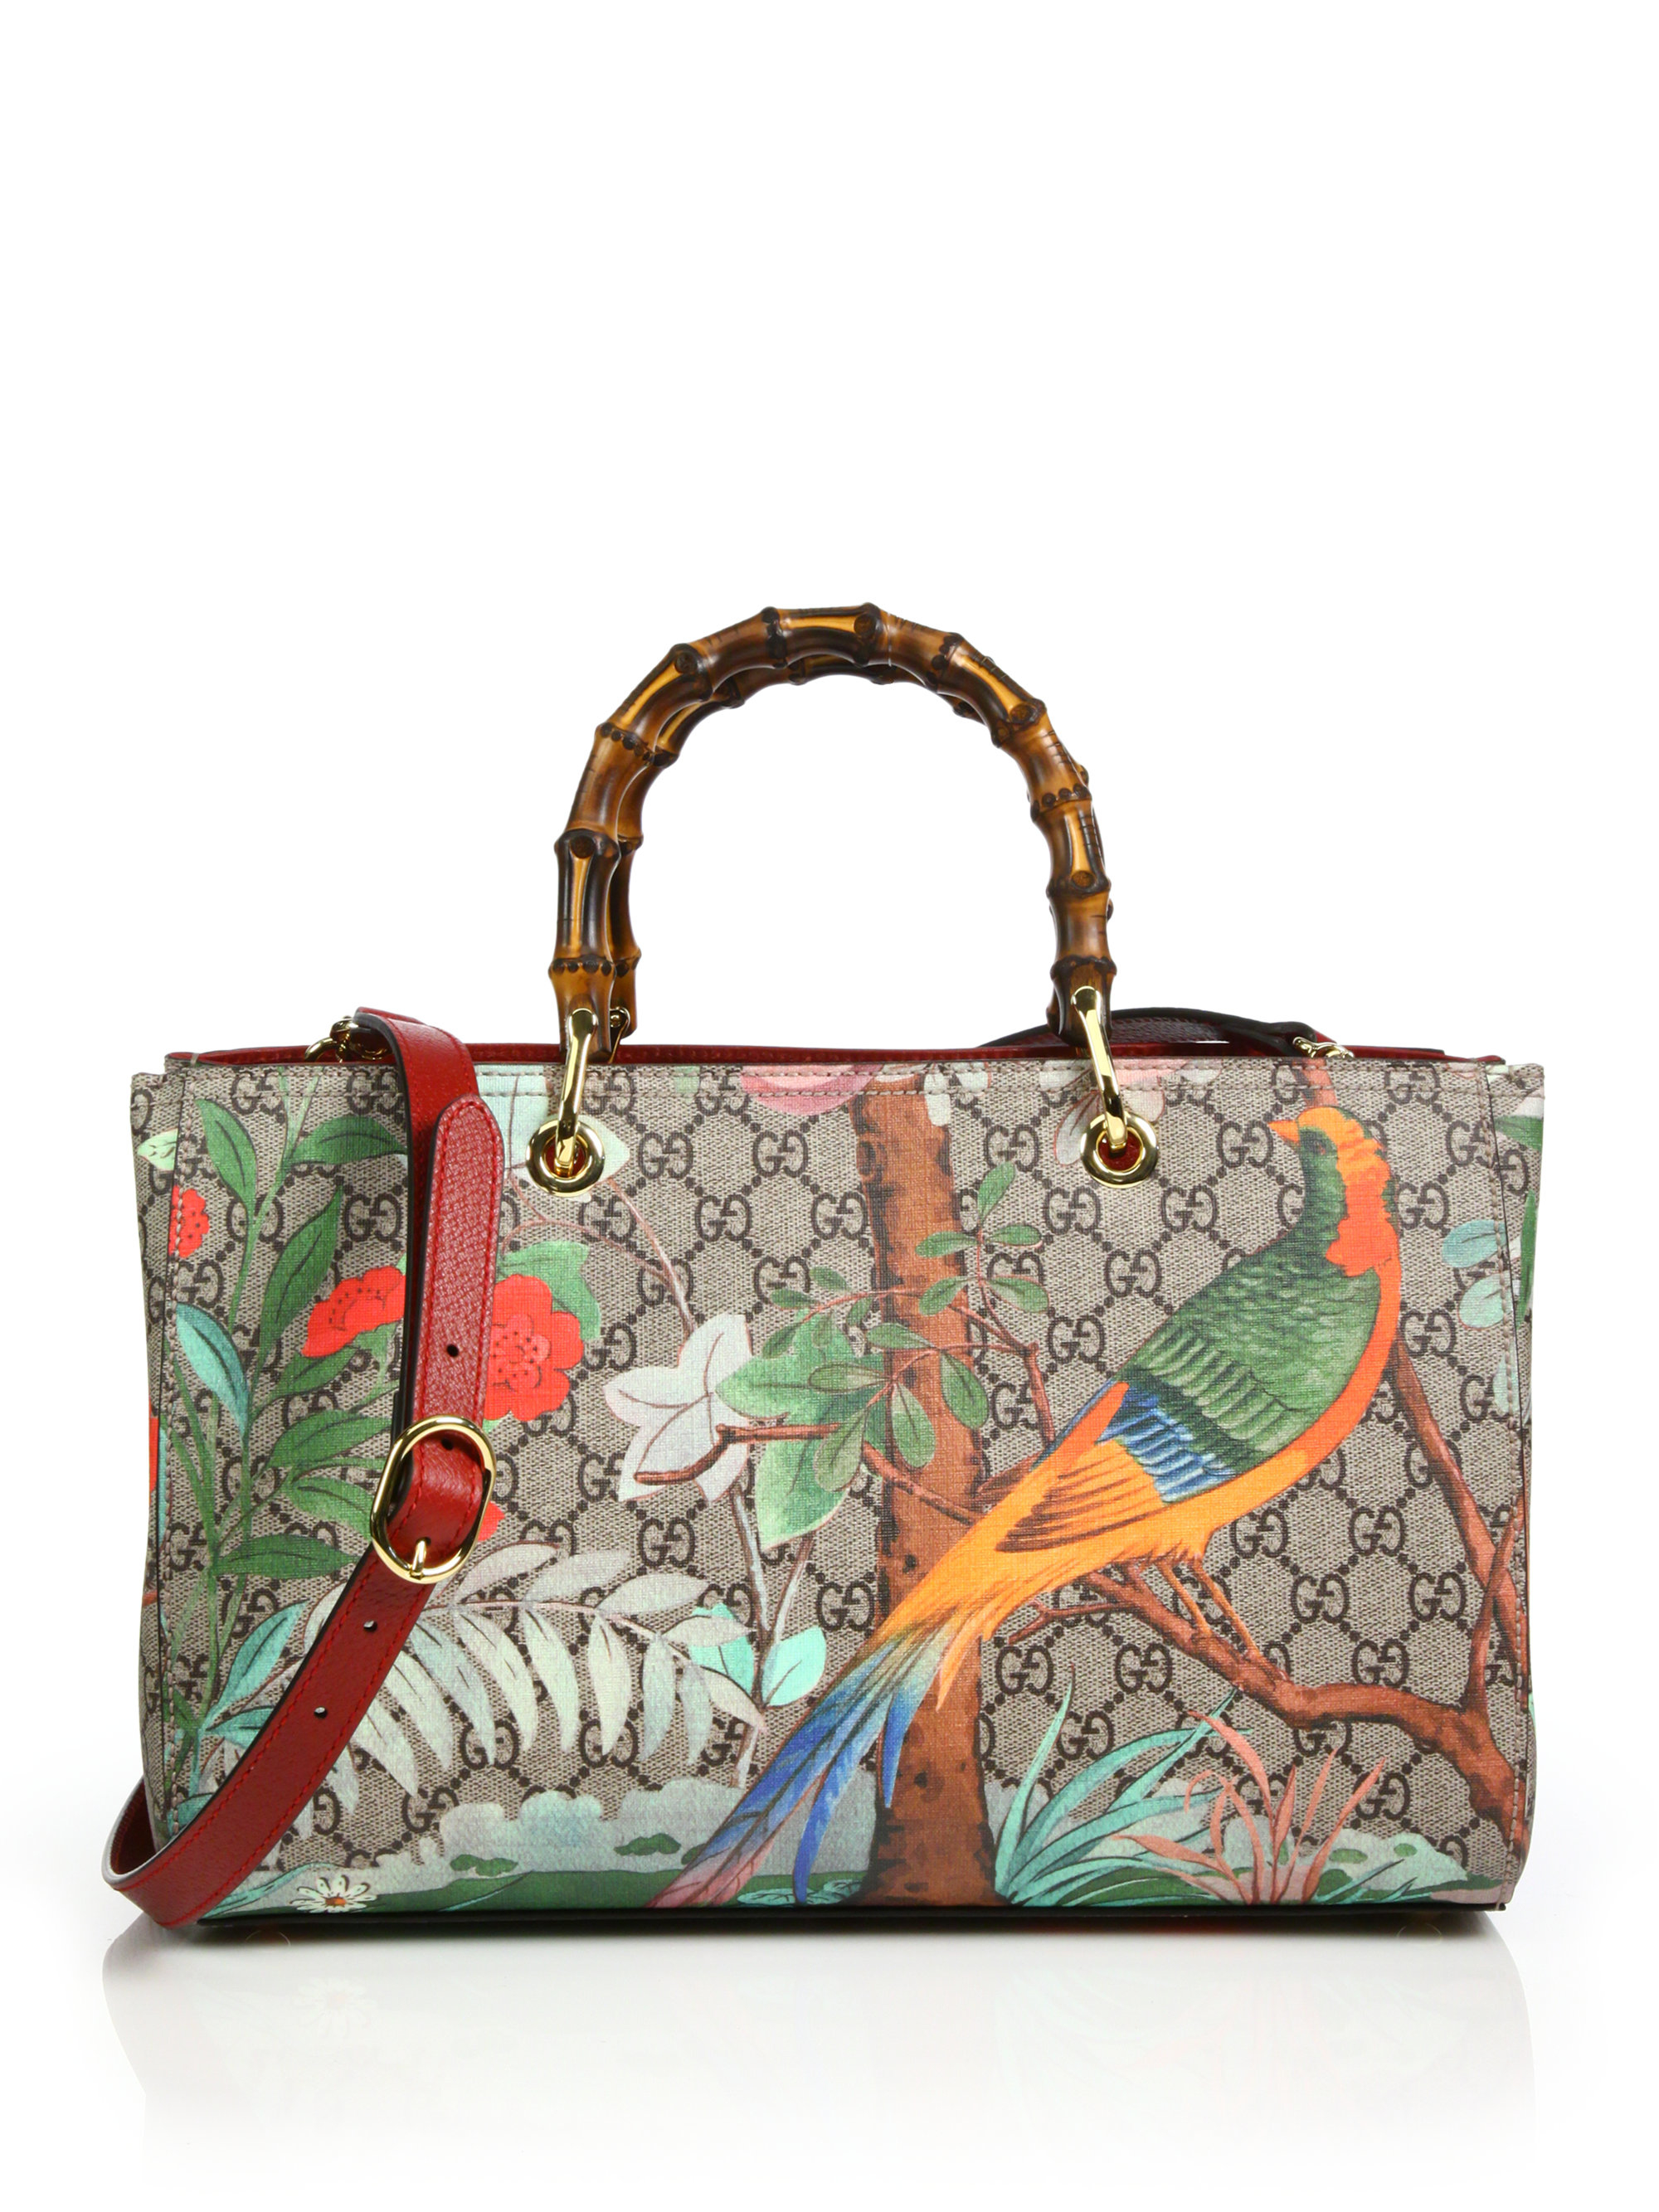 Details 80+ gucci bamboo bag limited edition best - esthdonghoadian